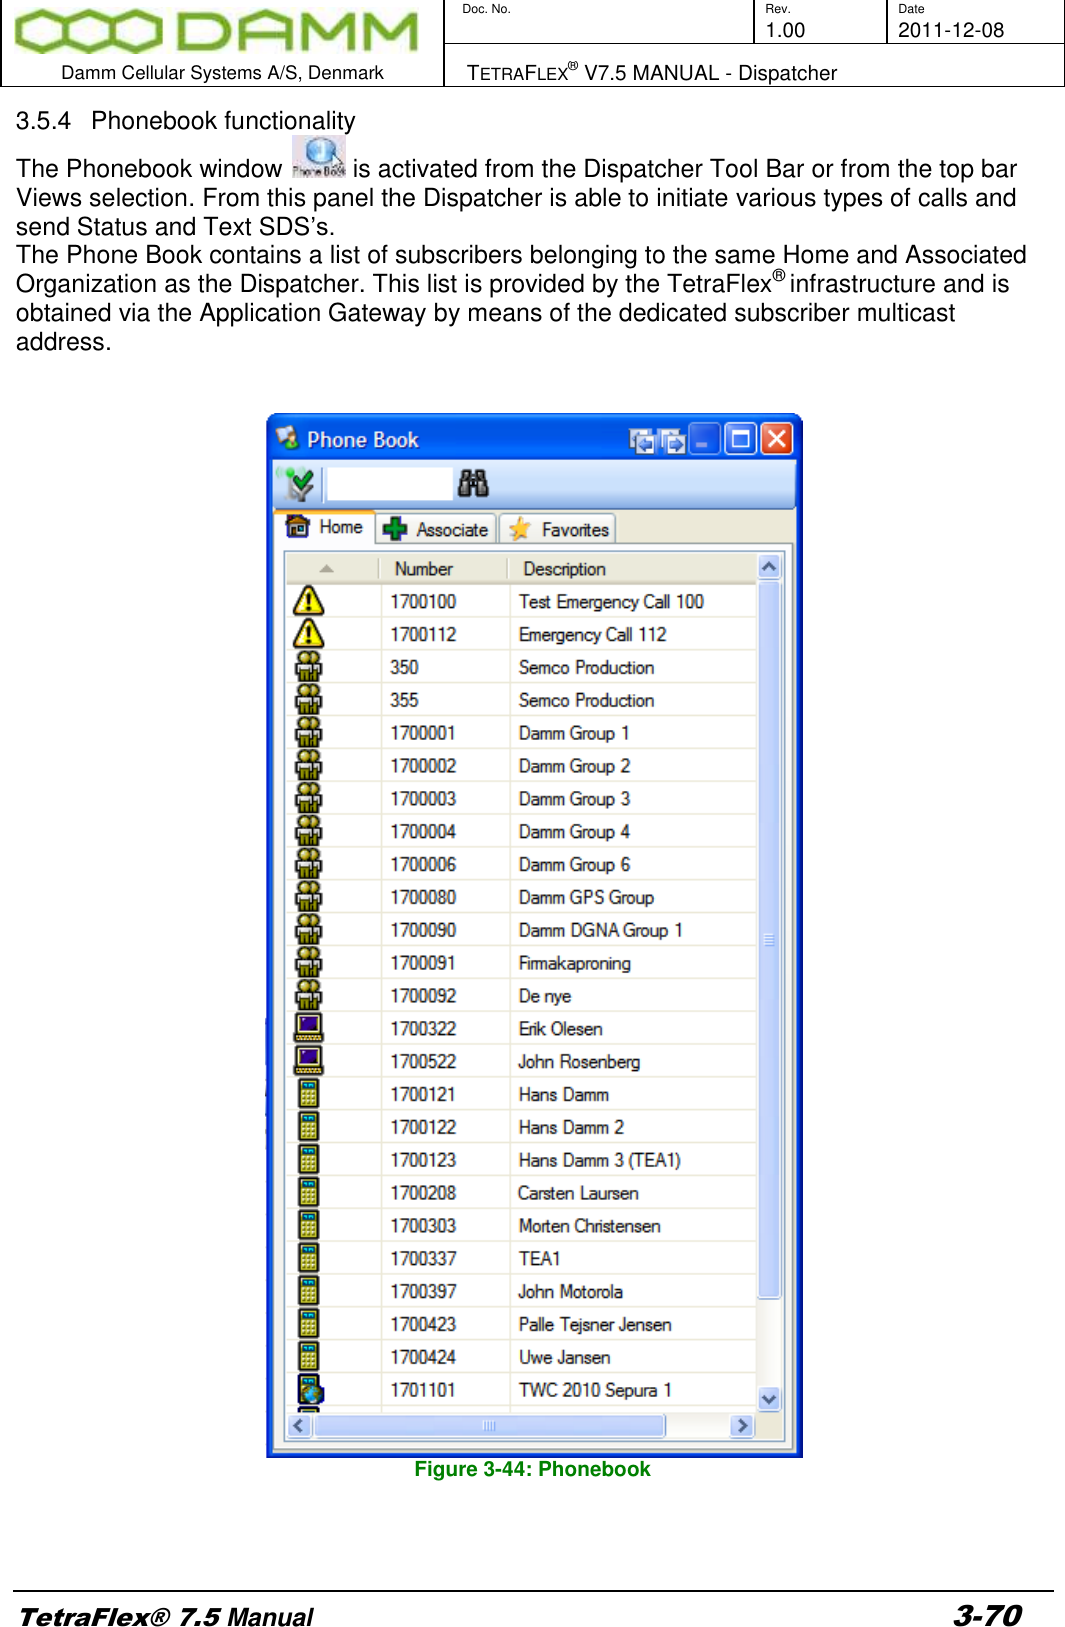        Doc. No. Rev. Date     1.00 2011-12-08  Damm Cellular Systems A/S, Denmark   TETRAFLEX® V7.5 MANUAL - Dispatcher  TetraFlex® 7.5 Manual 3-70 3.5.4  Phonebook functionality The Phonebook window   is activated from the Dispatcher Tool Bar or from the top bar Views selection. From this panel the Dispatcher is able to initiate various types of calls and send Status and Text SDS’s. The Phone Book contains a list of subscribers belonging to the same Home and Associated Organization as the Dispatcher. This list is provided by the TetraFlex® infrastructure and is obtained via the Application Gateway by means of the dedicated subscriber multicast address.                          Figure 3-44: Phonebook   